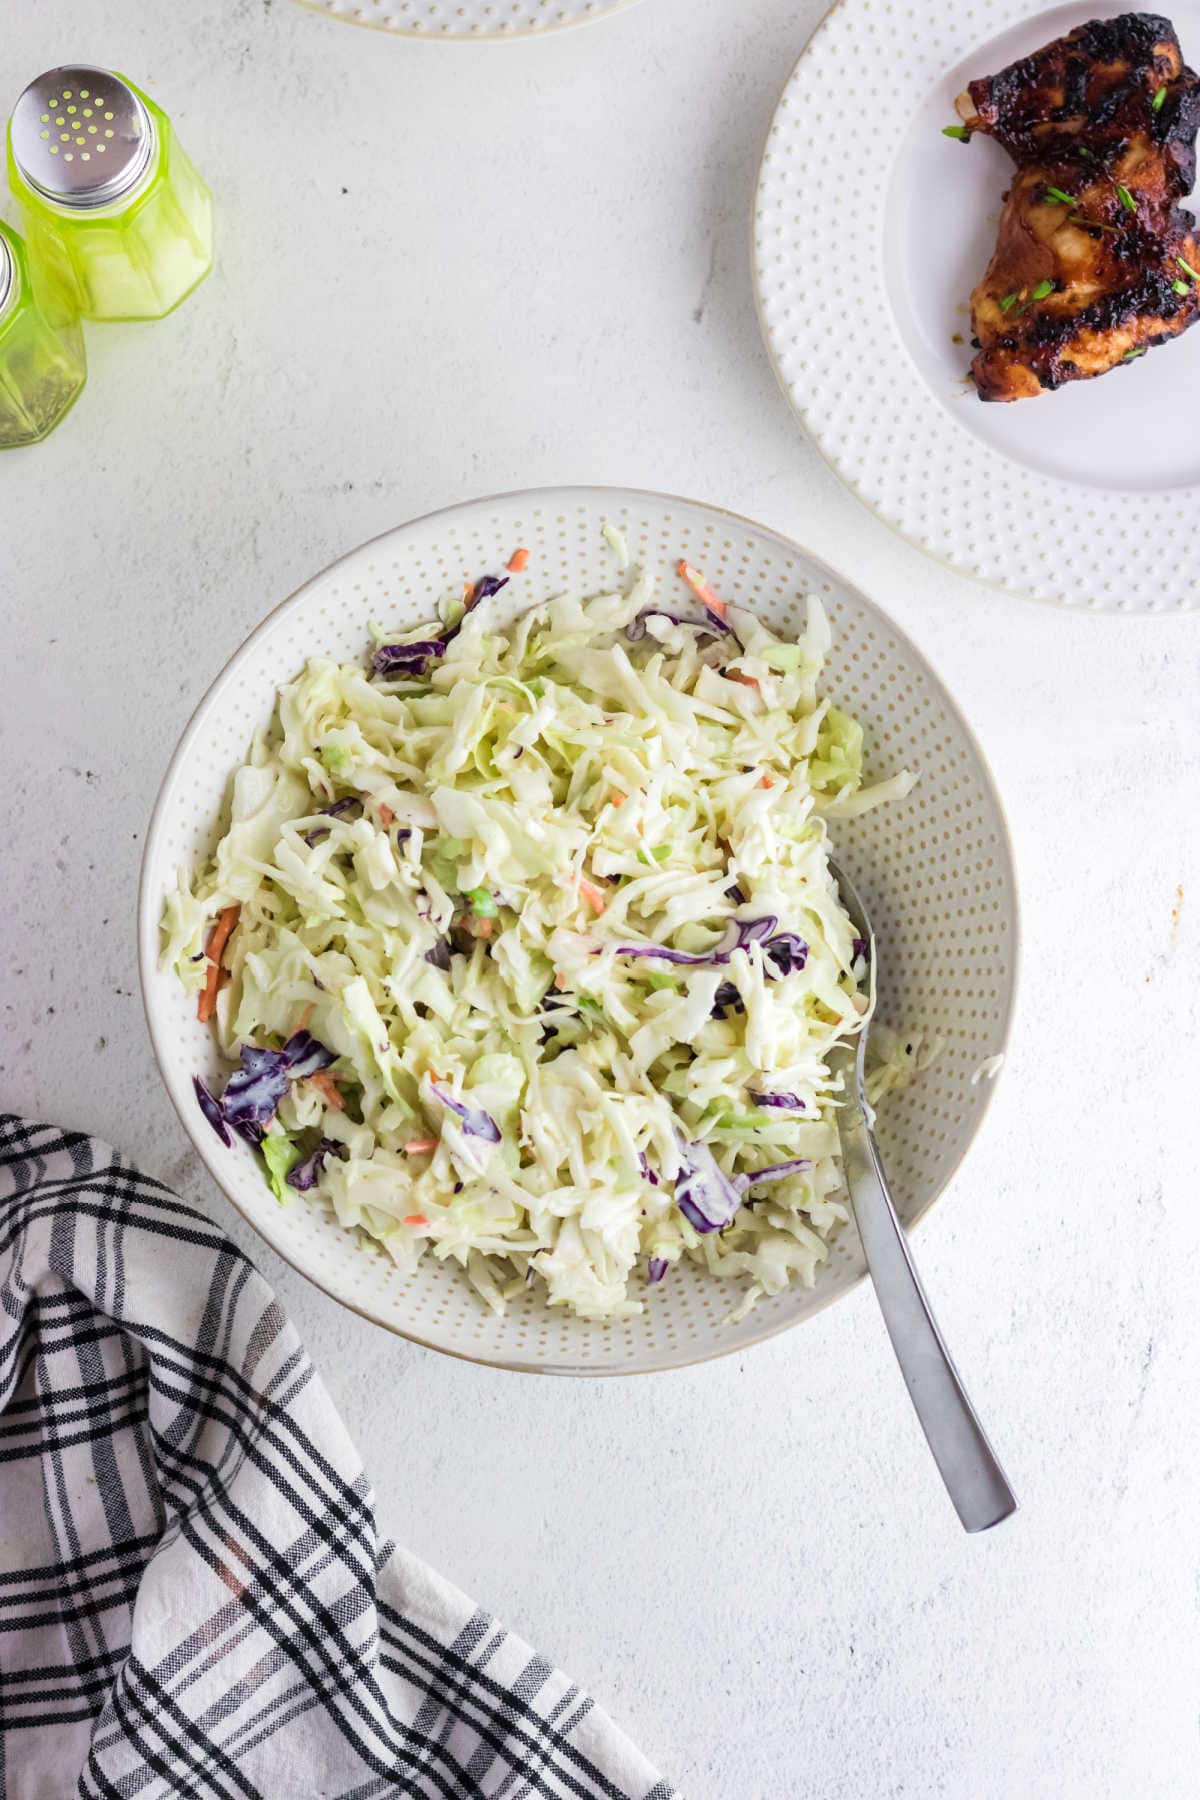 Overhead view of a bowl of coleslaw on a table.